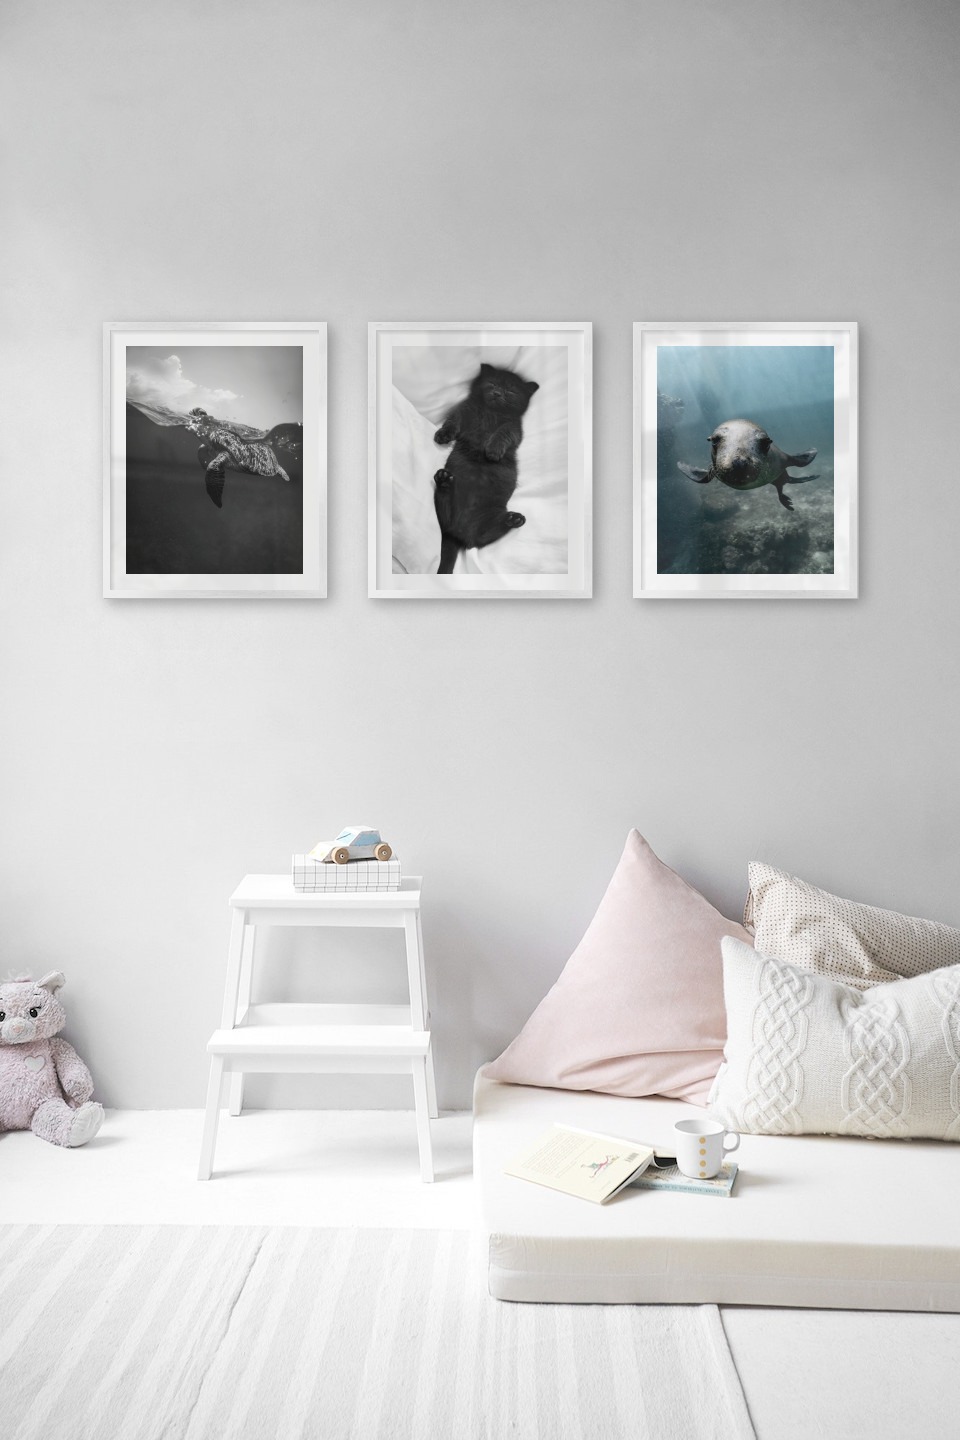 Gallery wall with picture frames in silver in sizes 40x50 with prints "Turtle", "Cat in bed" and "Seal in the water"